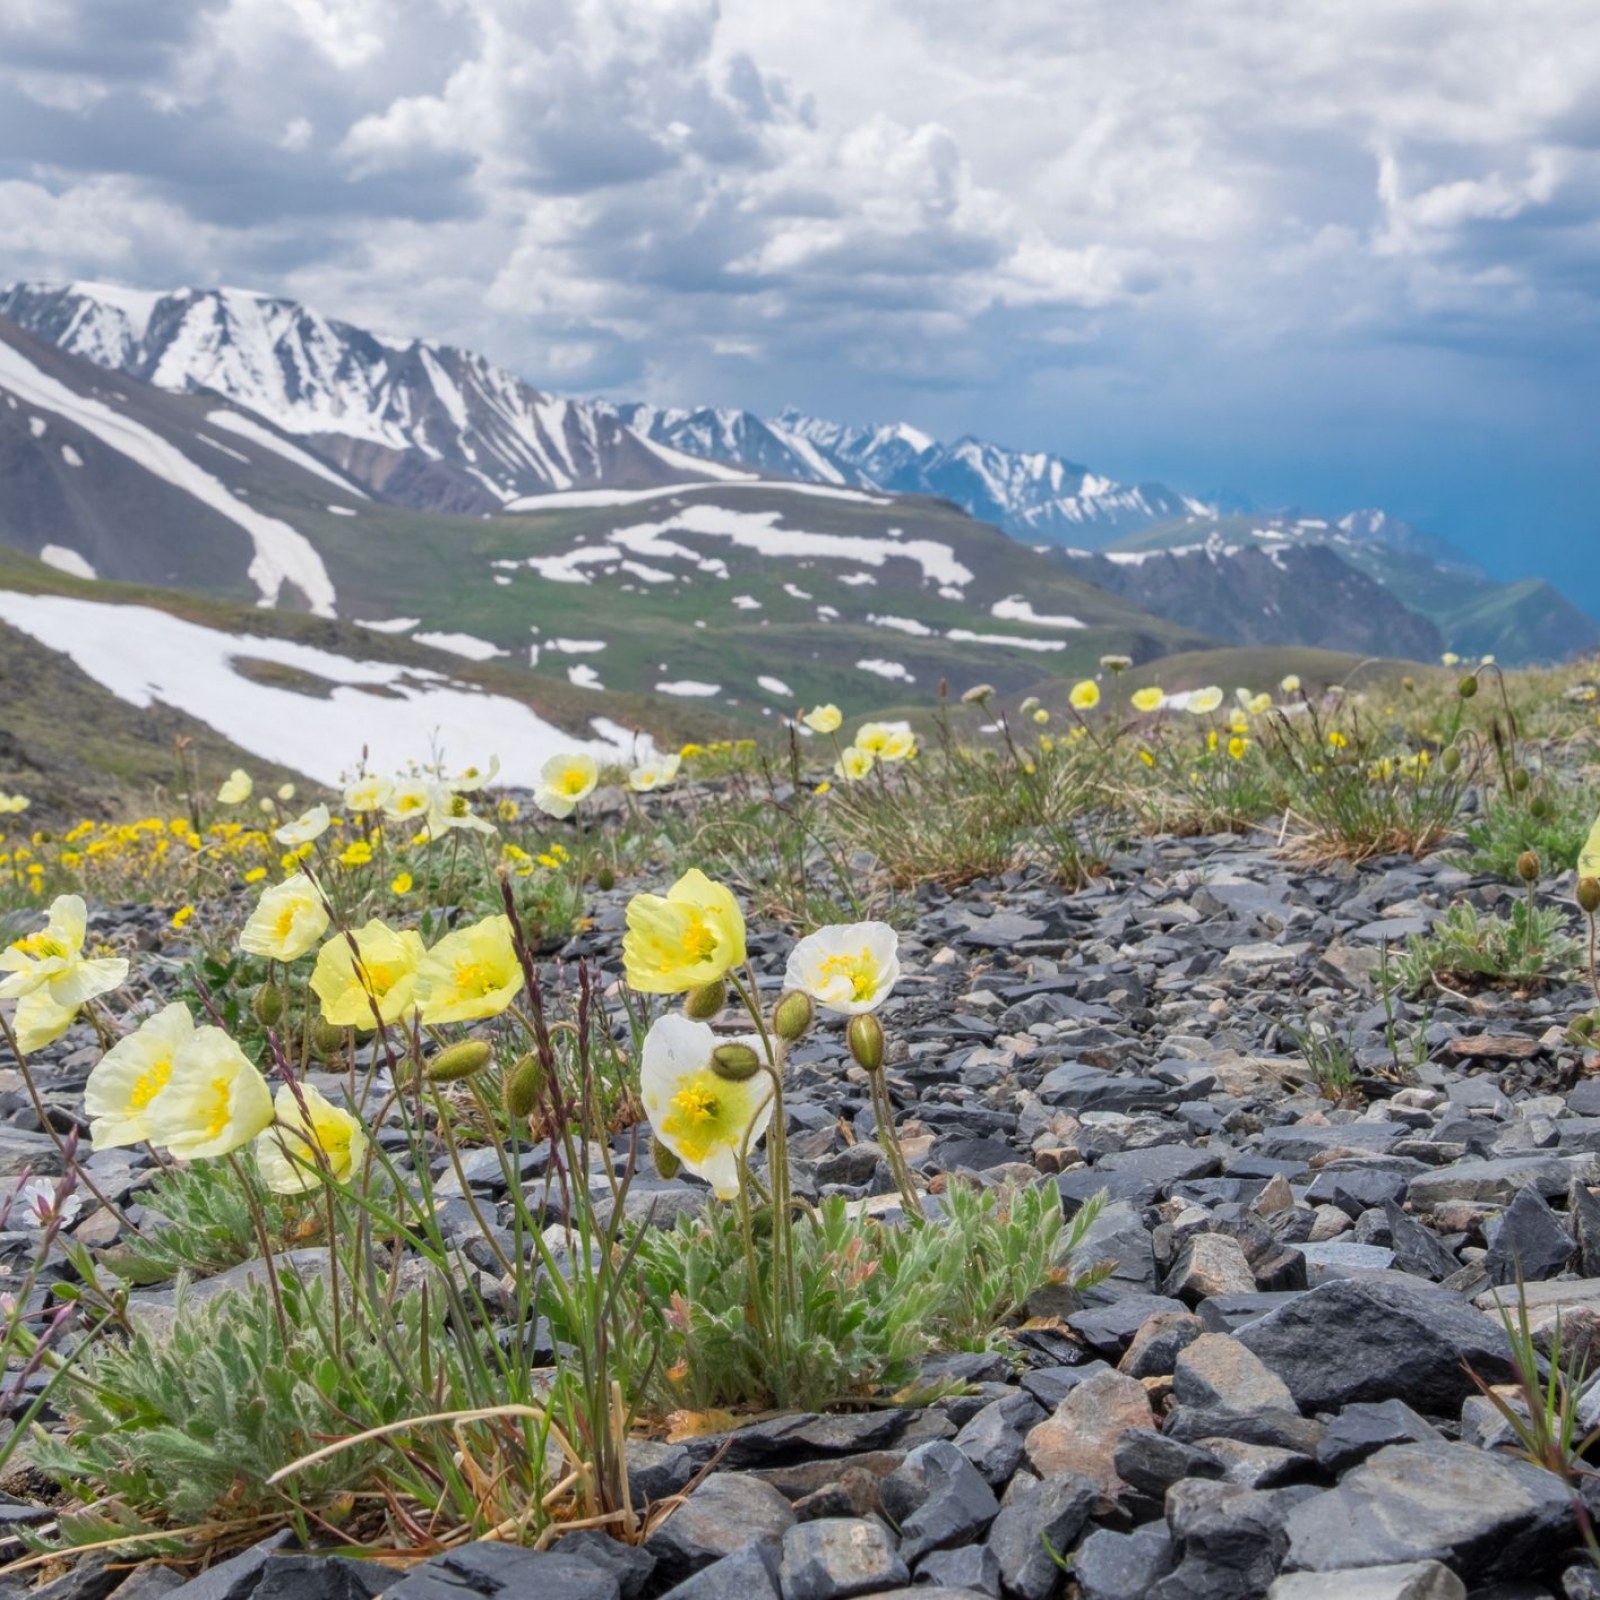 Climate Change Is Pushing Plants Into Arctic, Disrupting Tundra Ecosystems